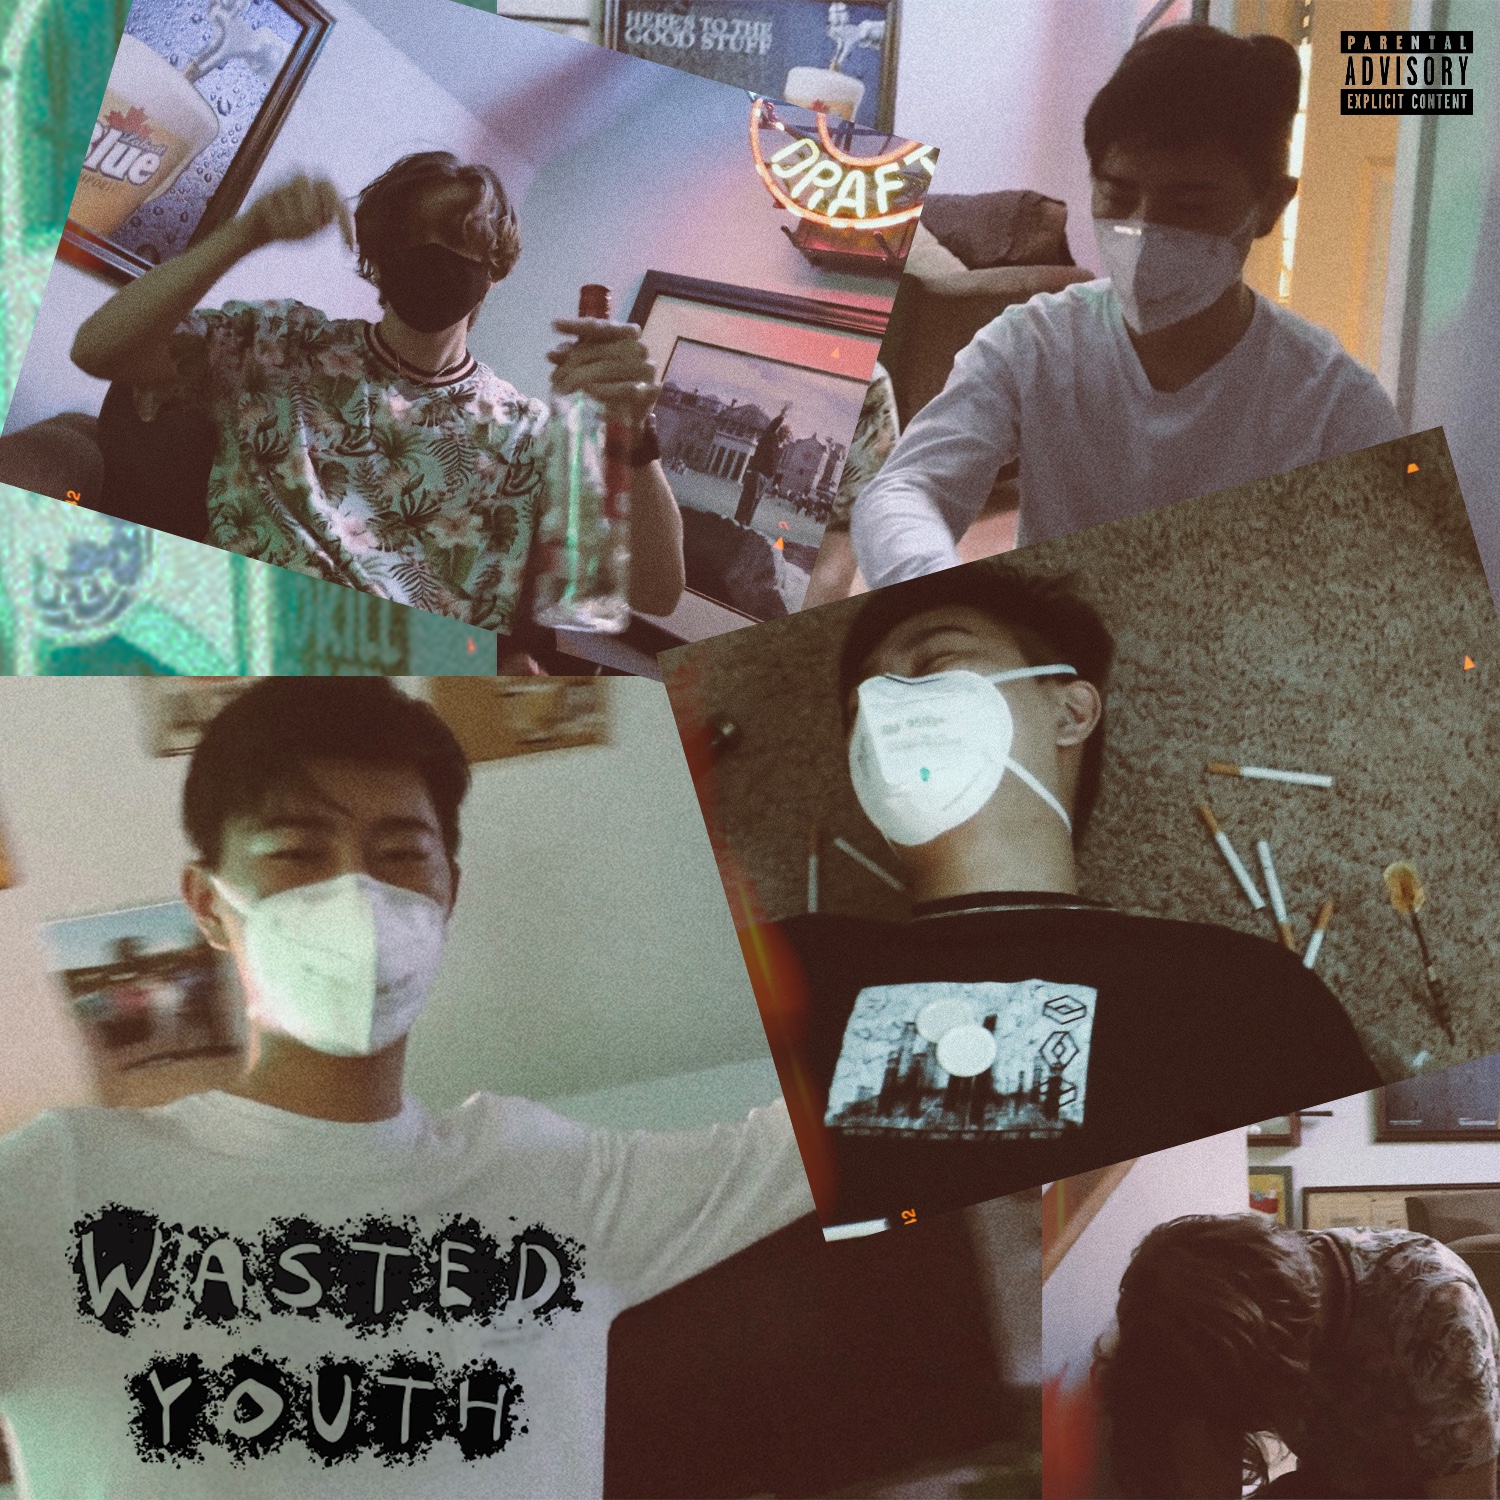 17 Letters Seek A Stable Love In “WASTED YOUTH”